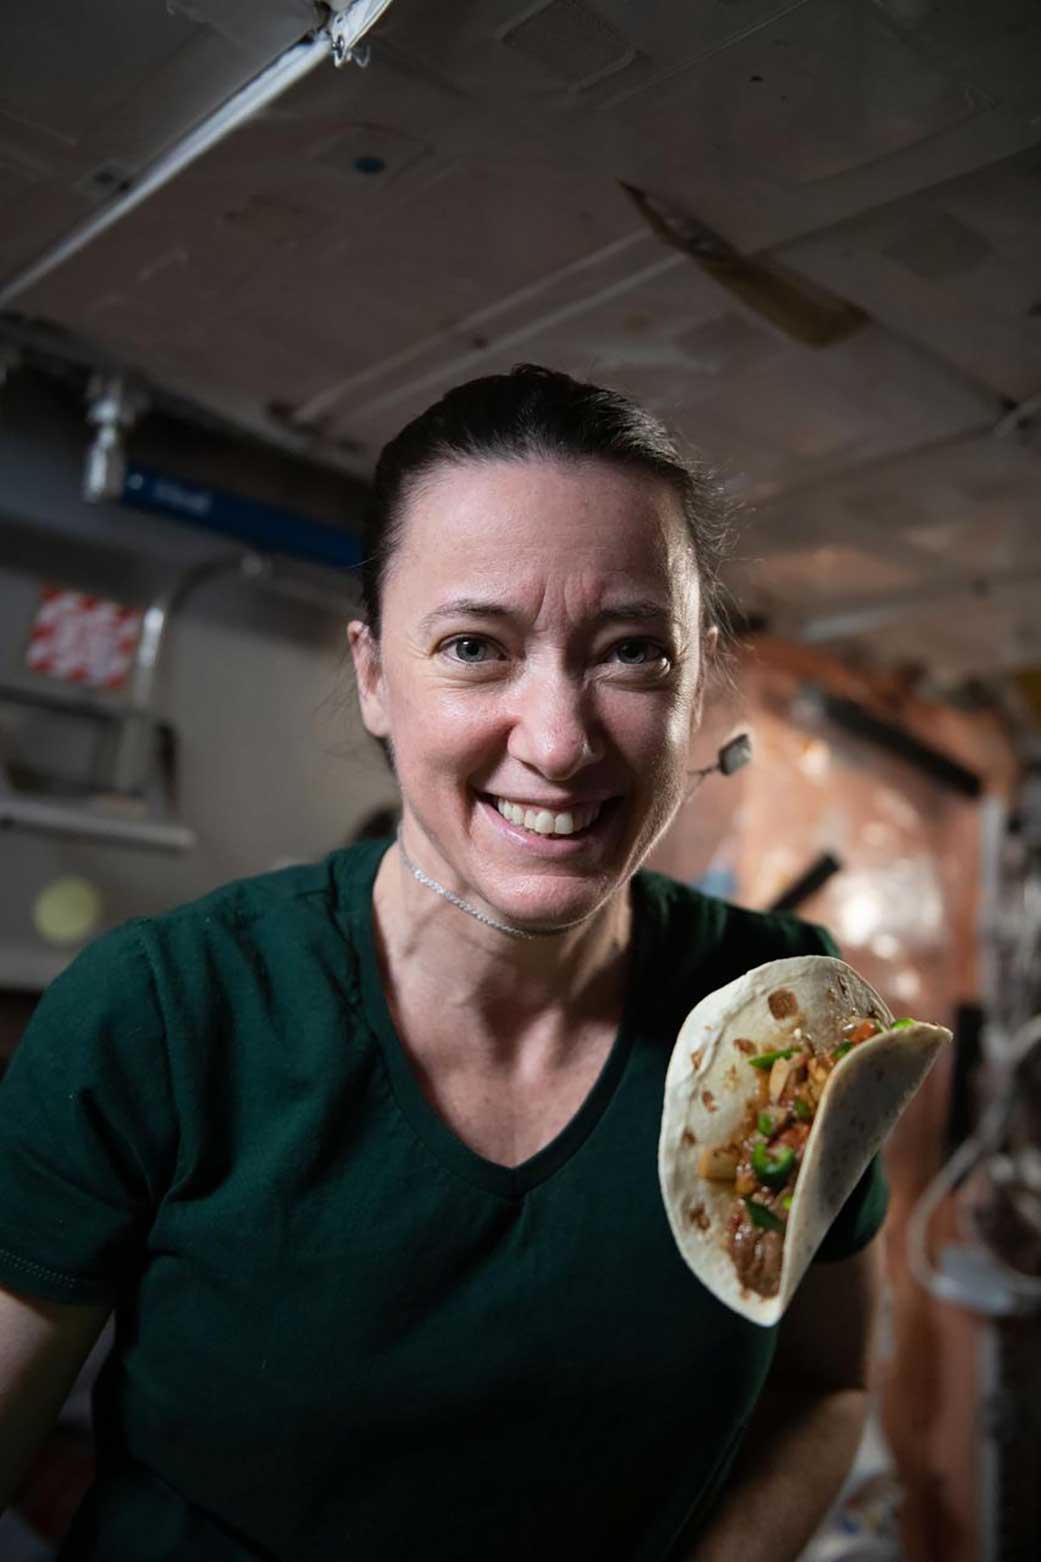 A female astronaut on the iSS wearing a green shirt has a taco floating in front of her.